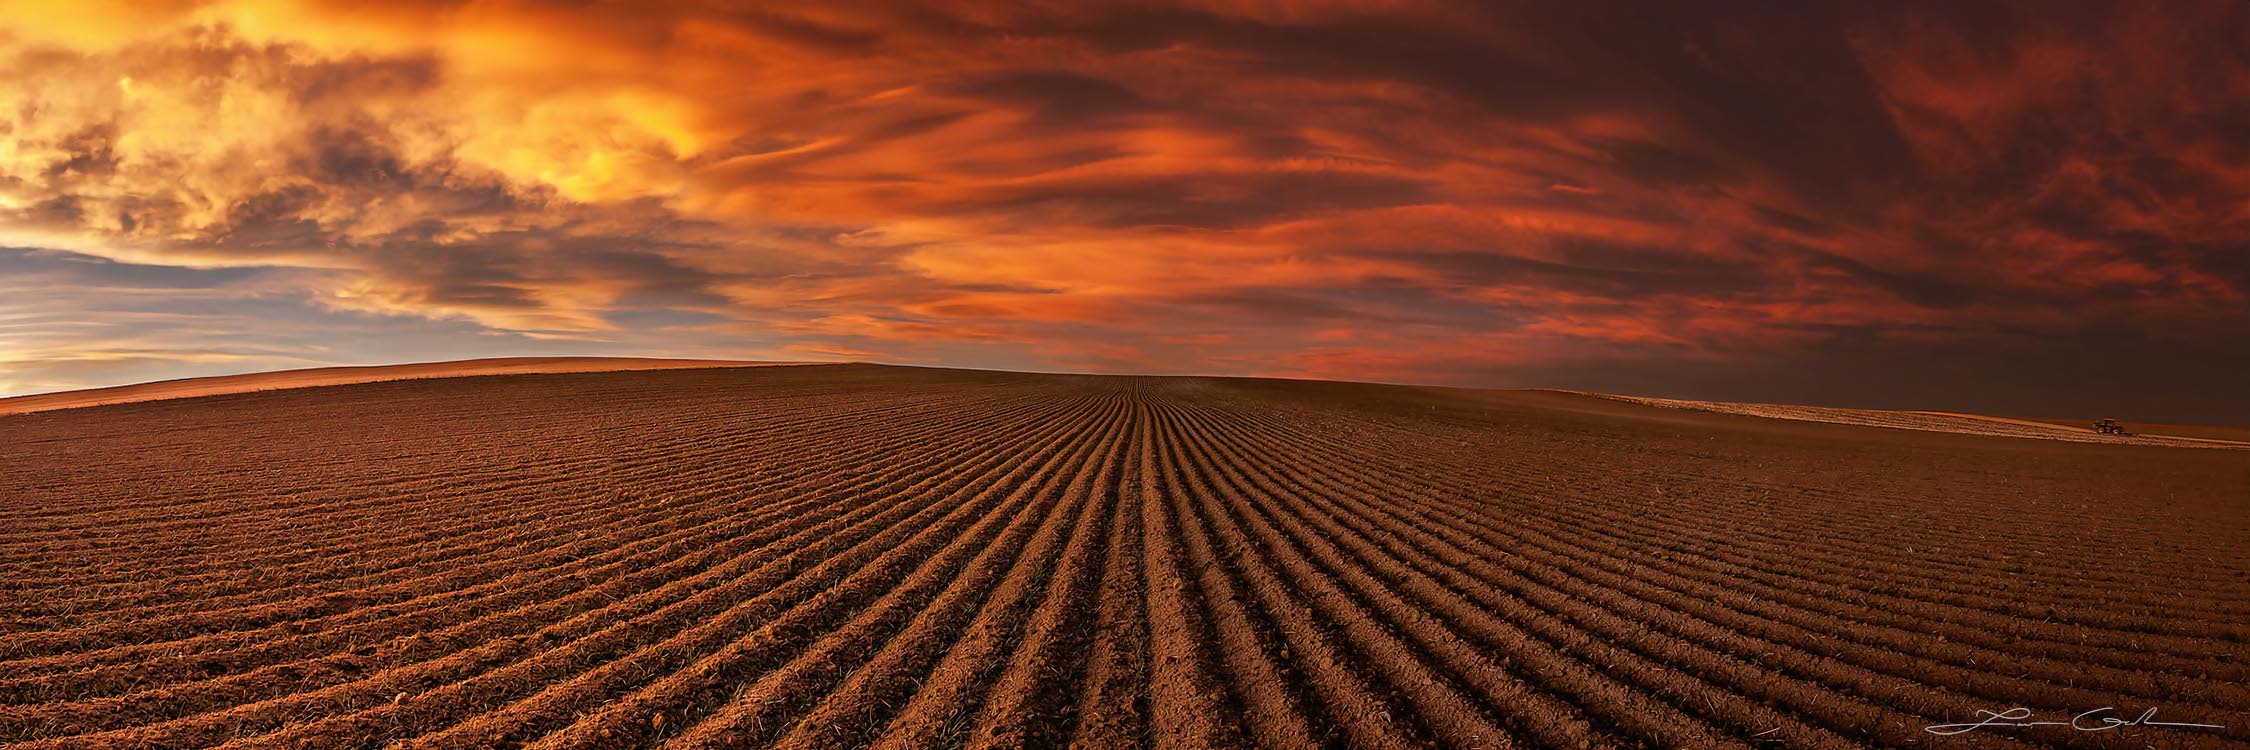 A field with furrows and very dramatic clouds with orange and yellow sunset colors